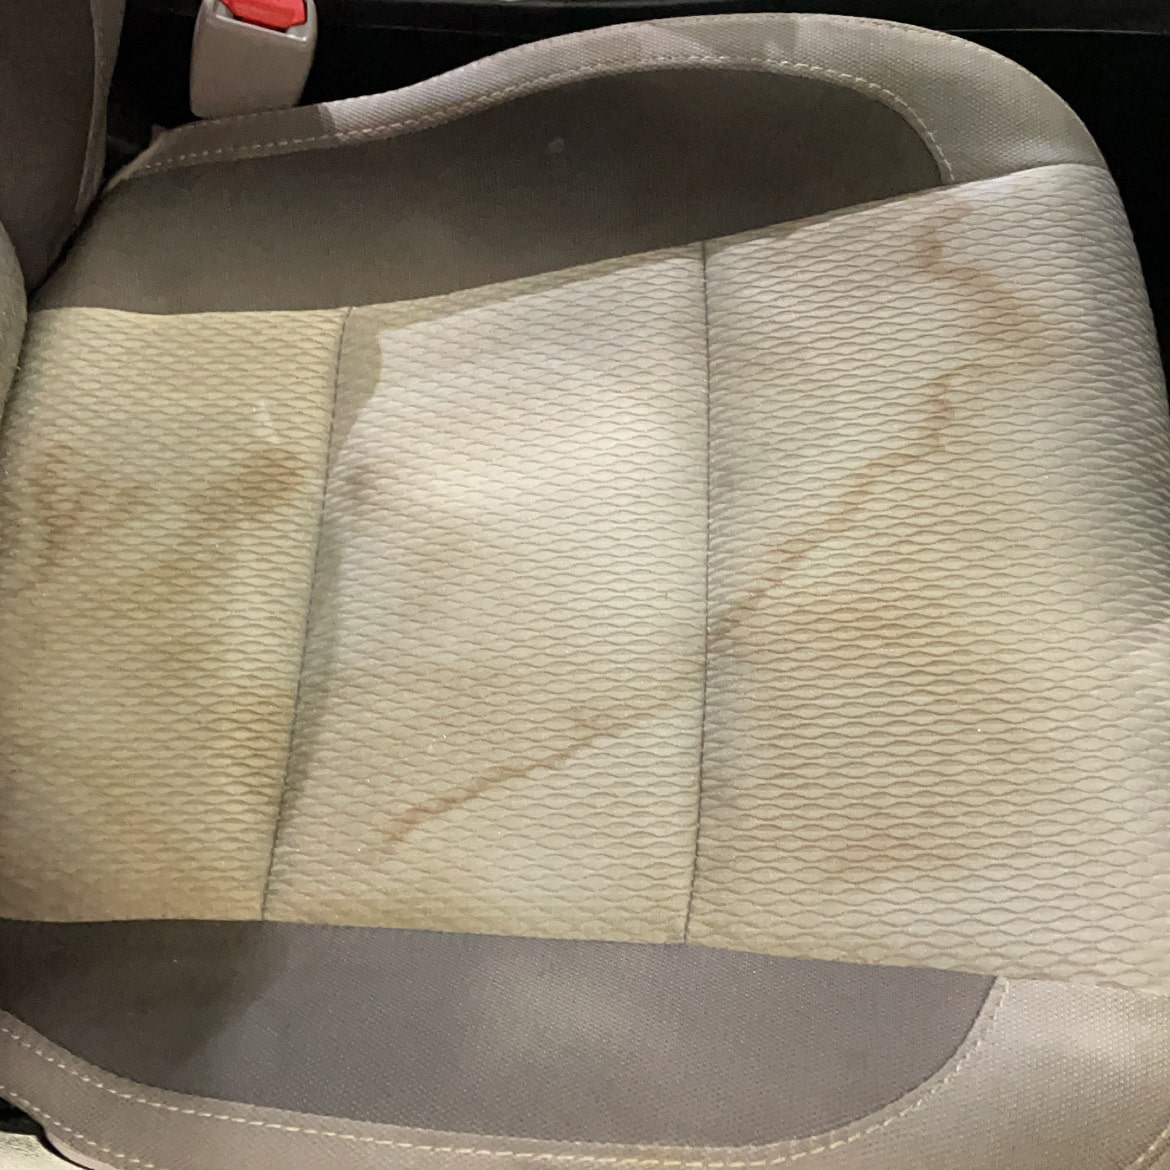 coffee stain on a car seat